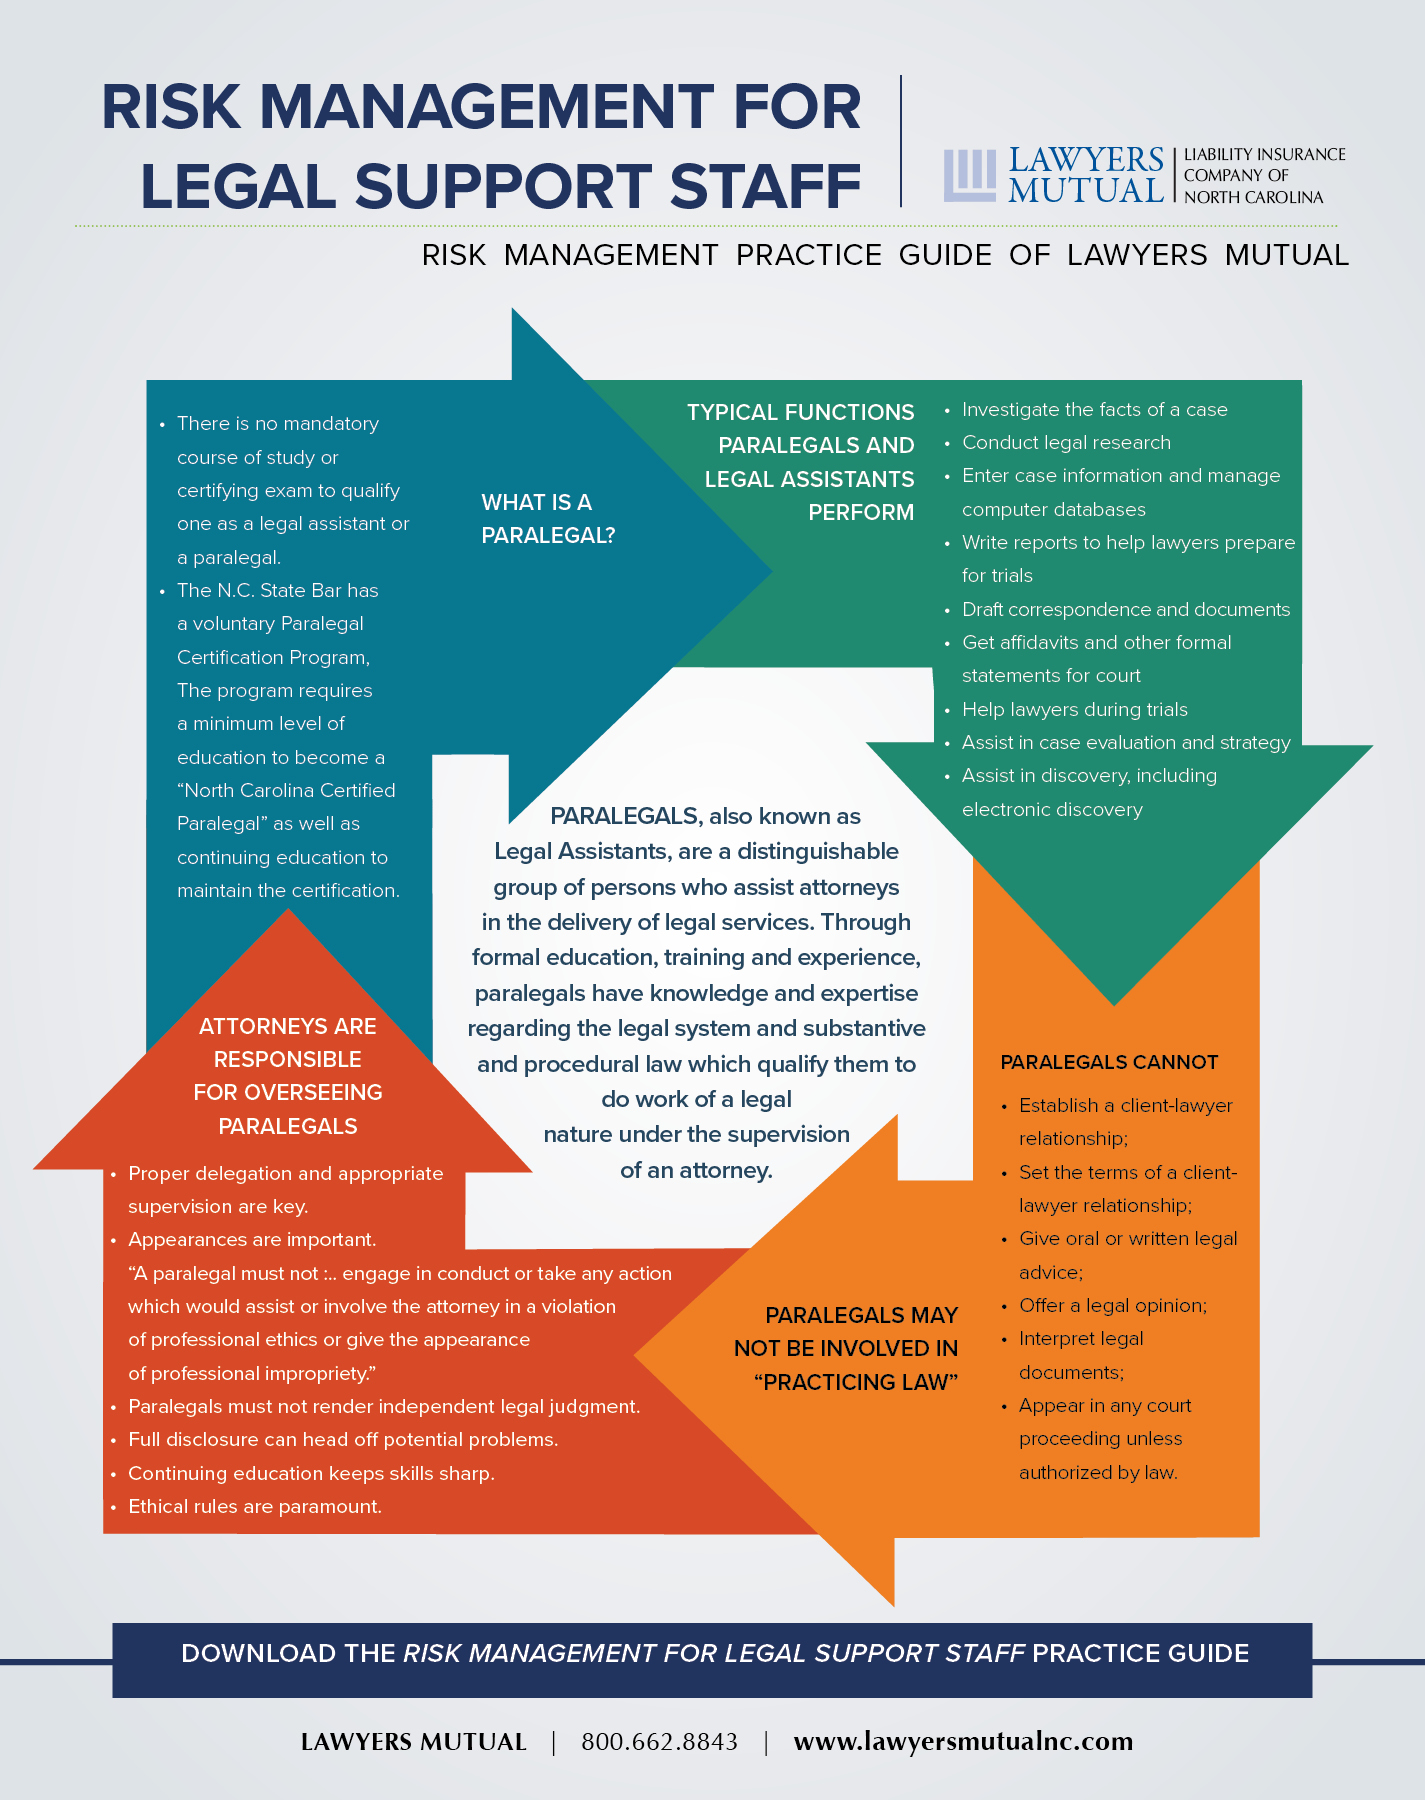 Infographic for Risk Management for Legal Support Staff practice guide